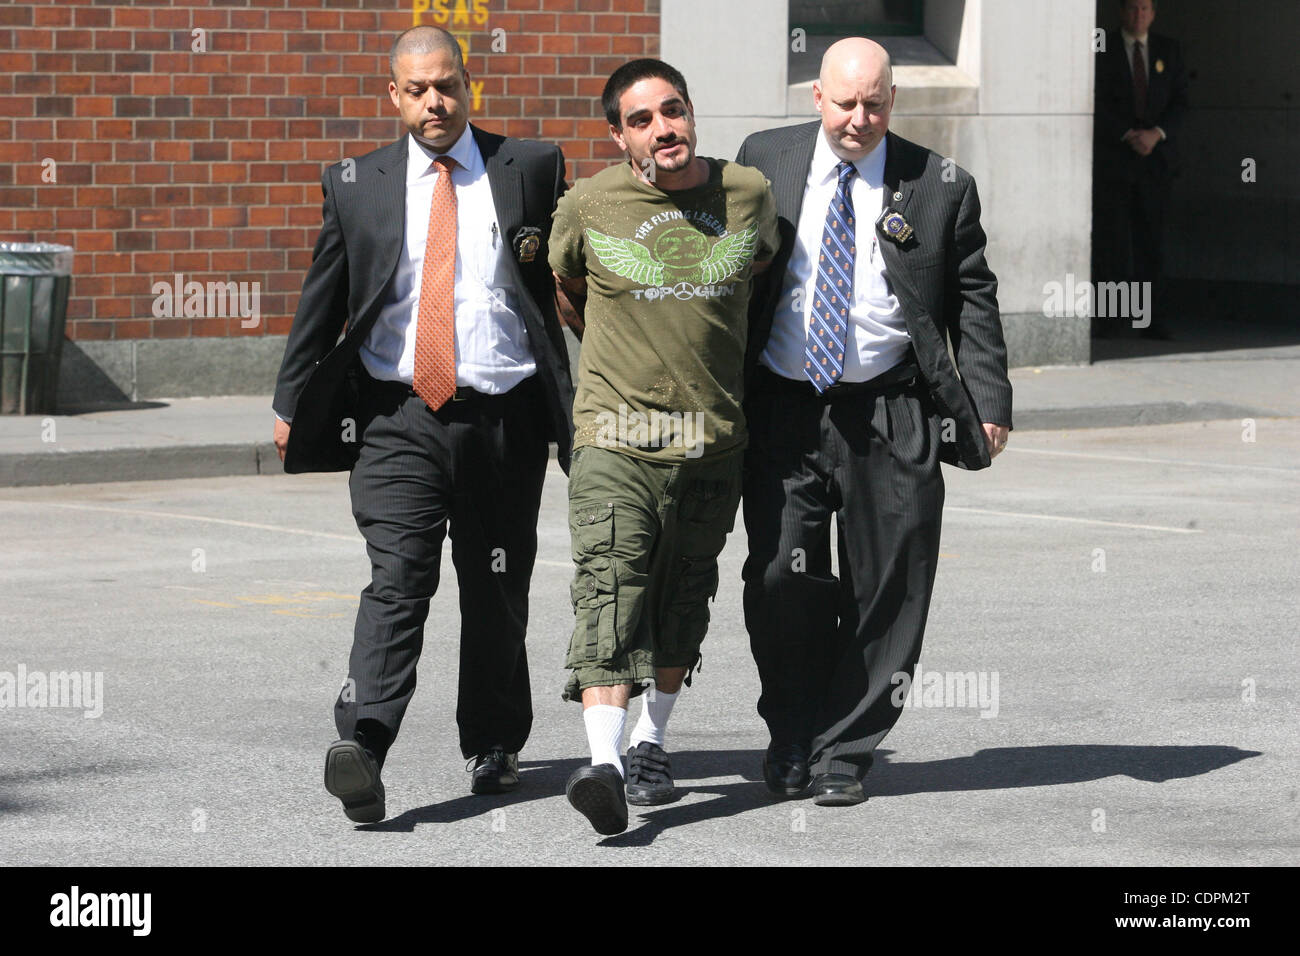 Cops arrested East side perv Jeffrey Ritter, 32 who assaulted at 85 year-old woman on a Madison Ave. stoop on Memorial Day in Manhattan. Photo Credi: Mariela Lombard/ZUMA Press. Stock Photo